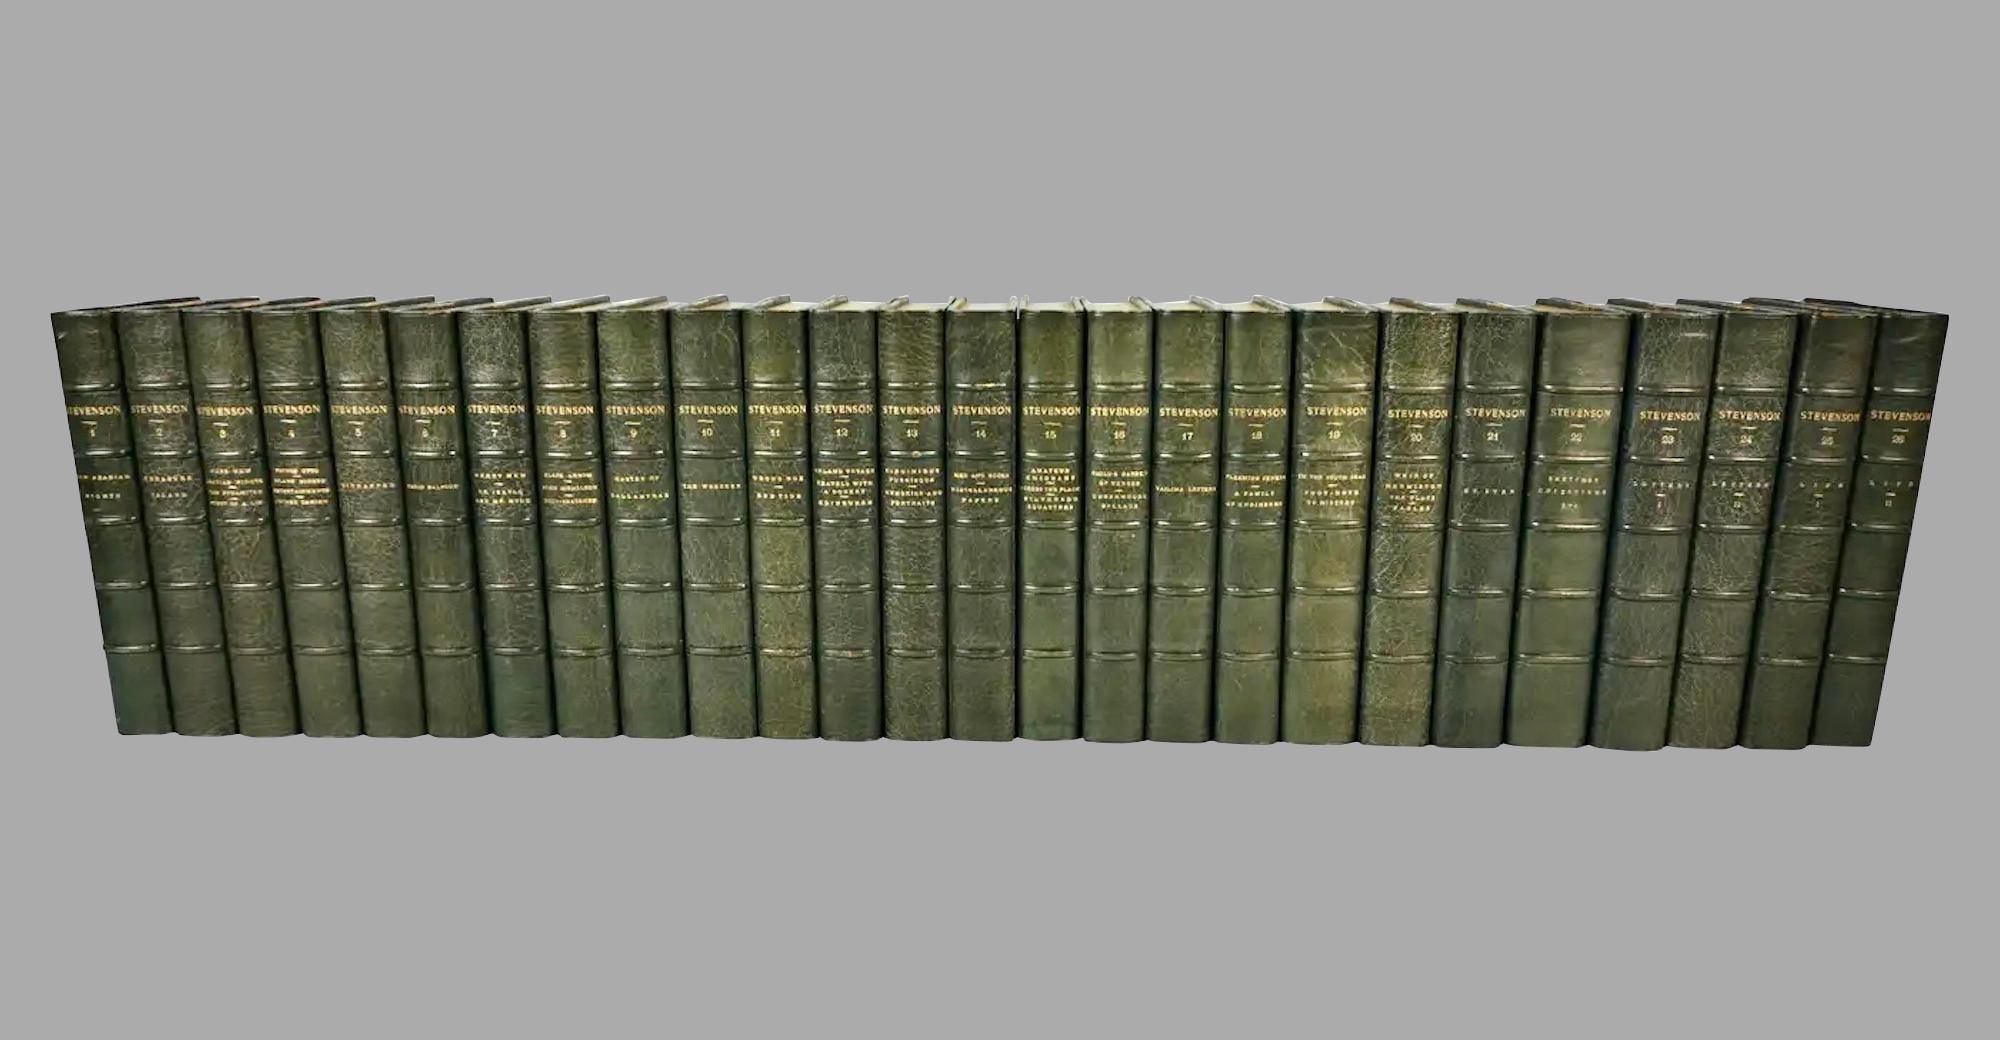 A lovely leatherbound set of the complete works of Robert Louis Stevenson (1850-1894) in 26 volumes published by Charles Scribner's Sons, New York 1902. The set is bound in 3/4 morocco leather with marbleized boards and endpapers, the spines with